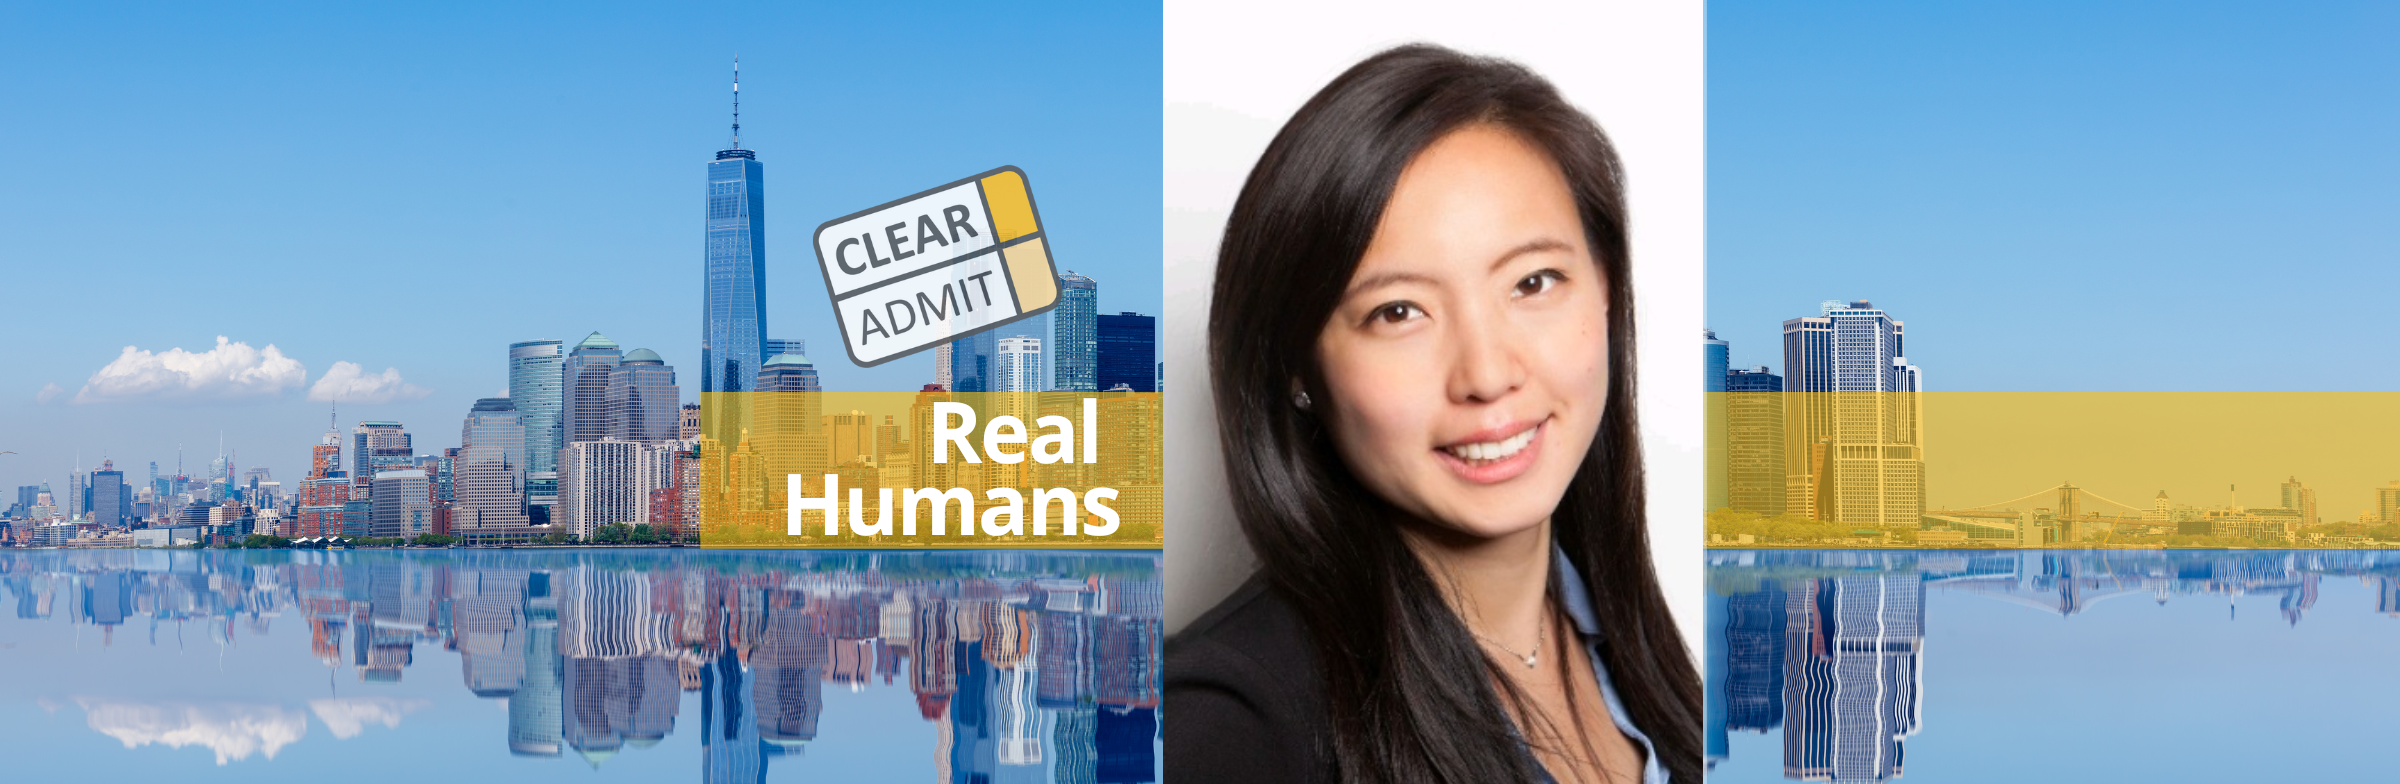 Image for Real Humans of Accenture: Cathy Chen, Chicago Booth MBA ’20, Strategy Manager